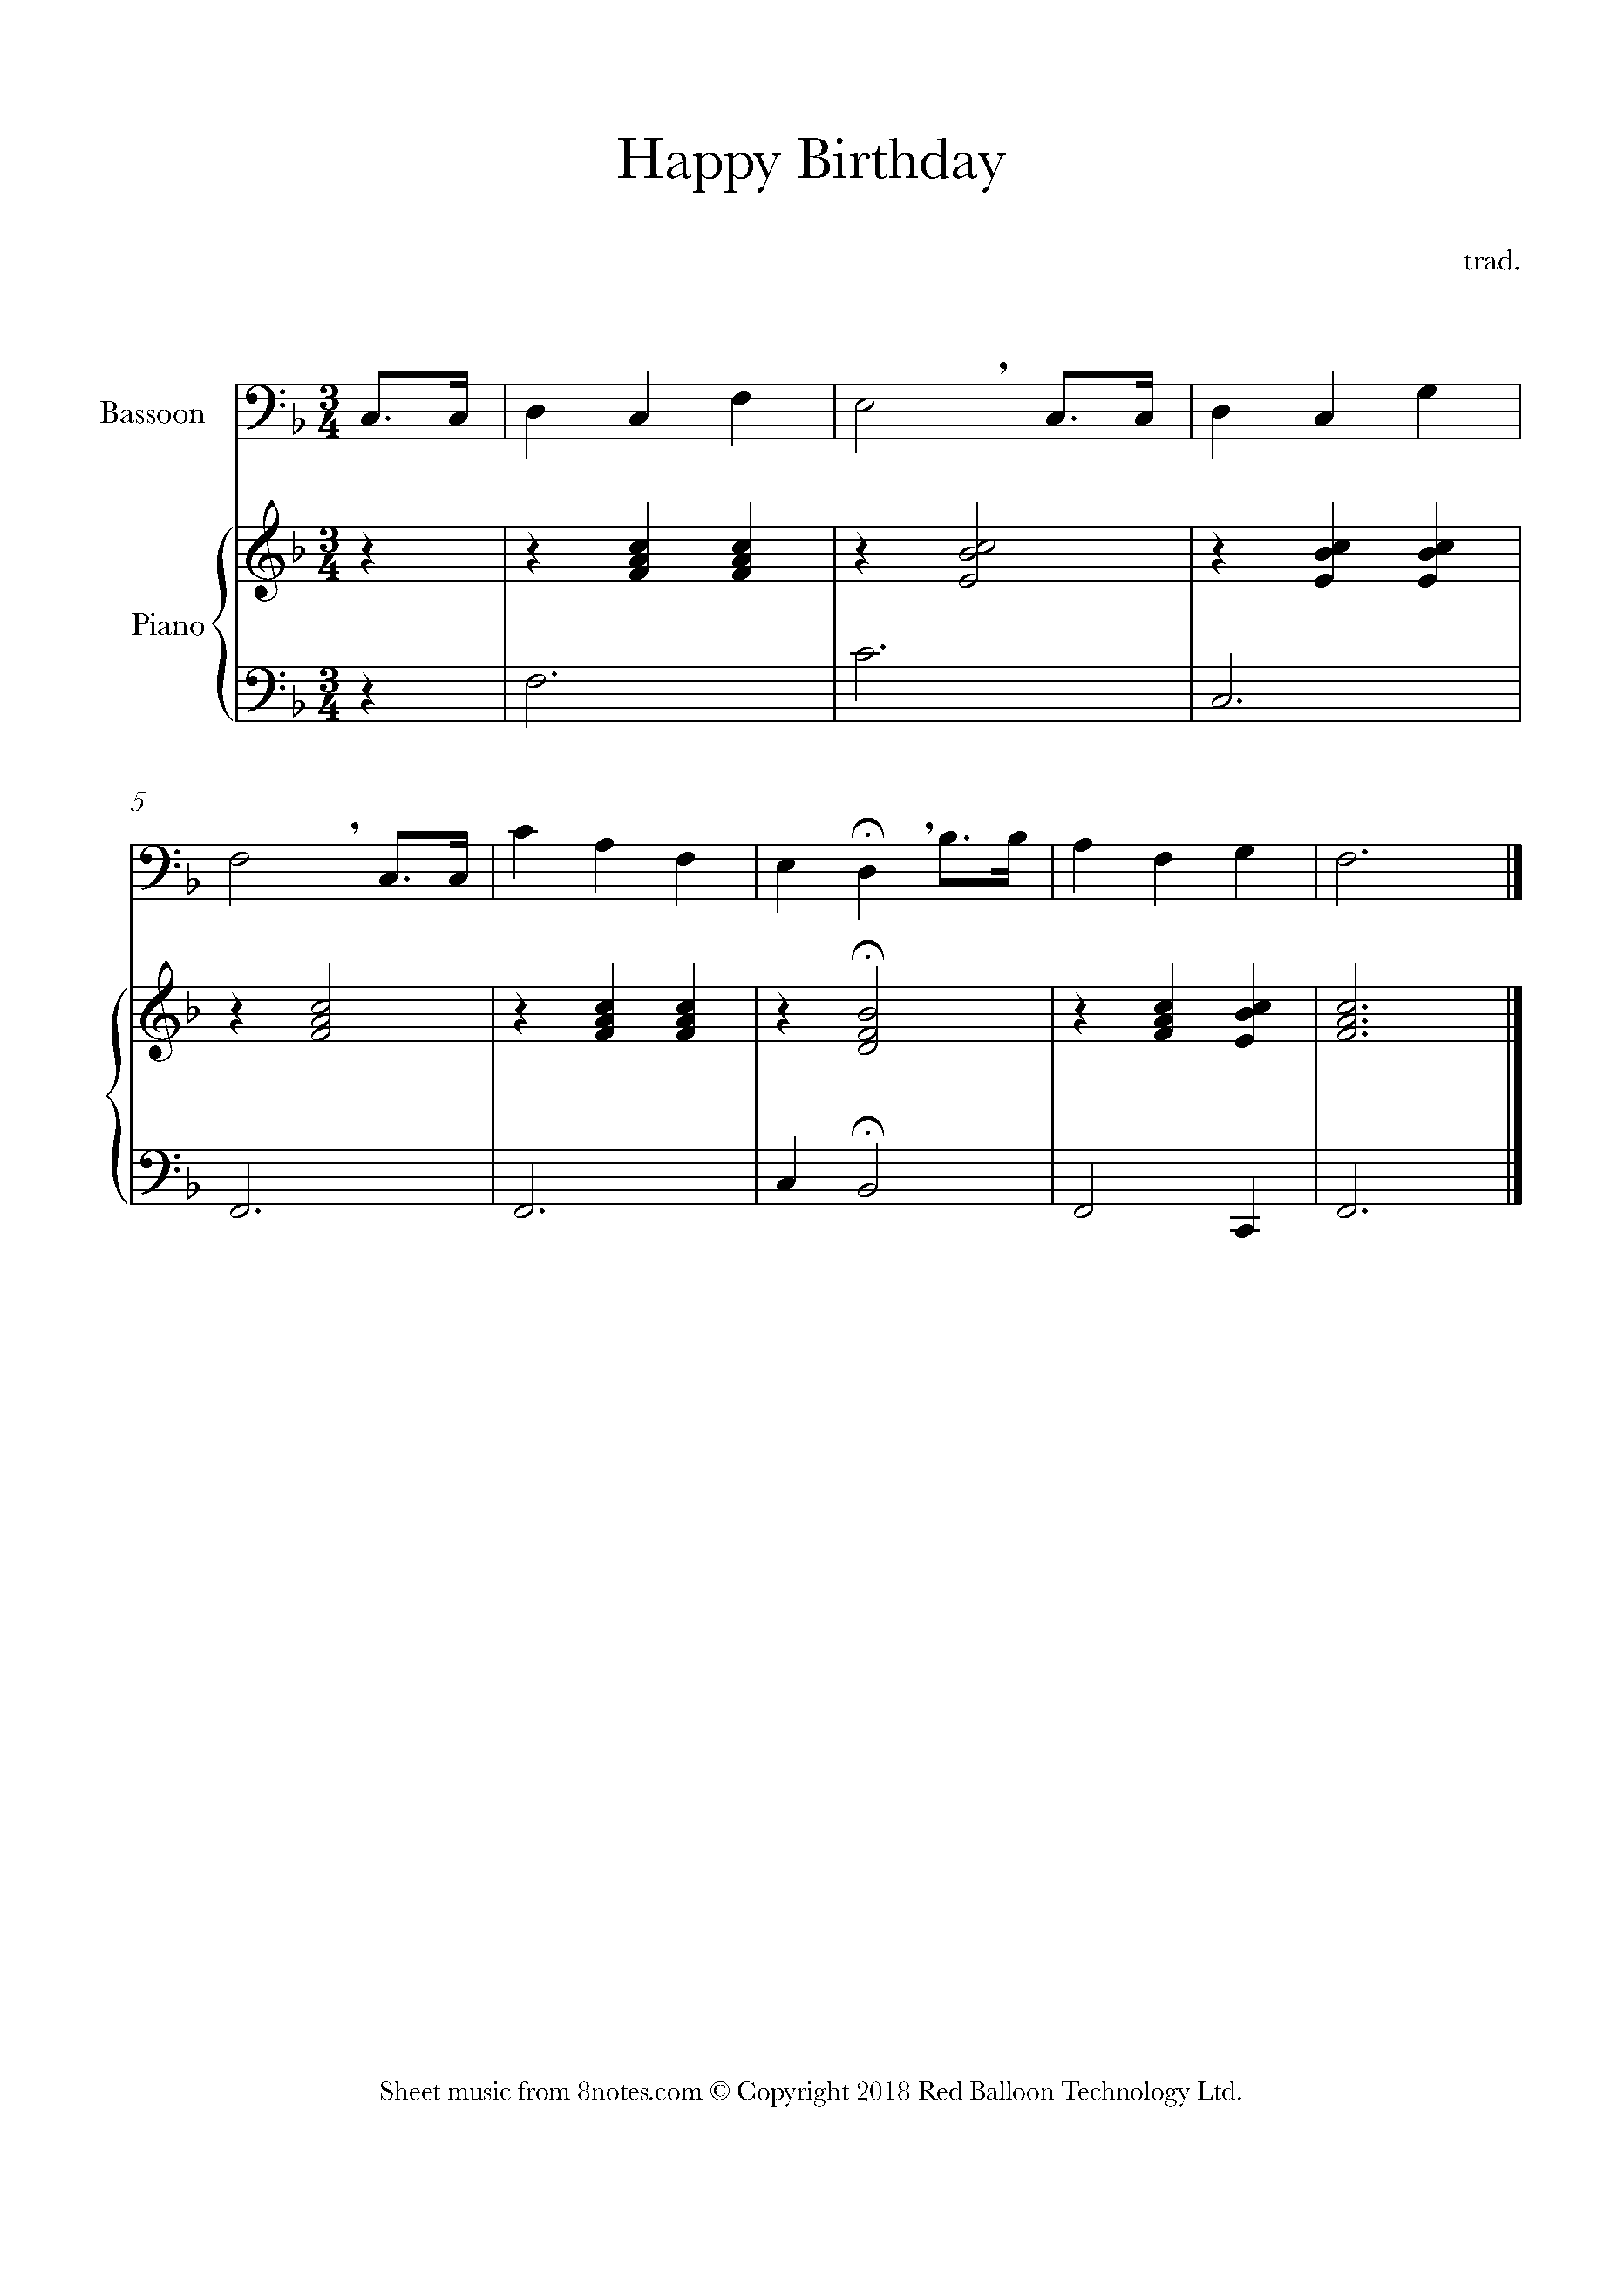 Happy Birthday Sheet music for Bassoon - 8notes.com